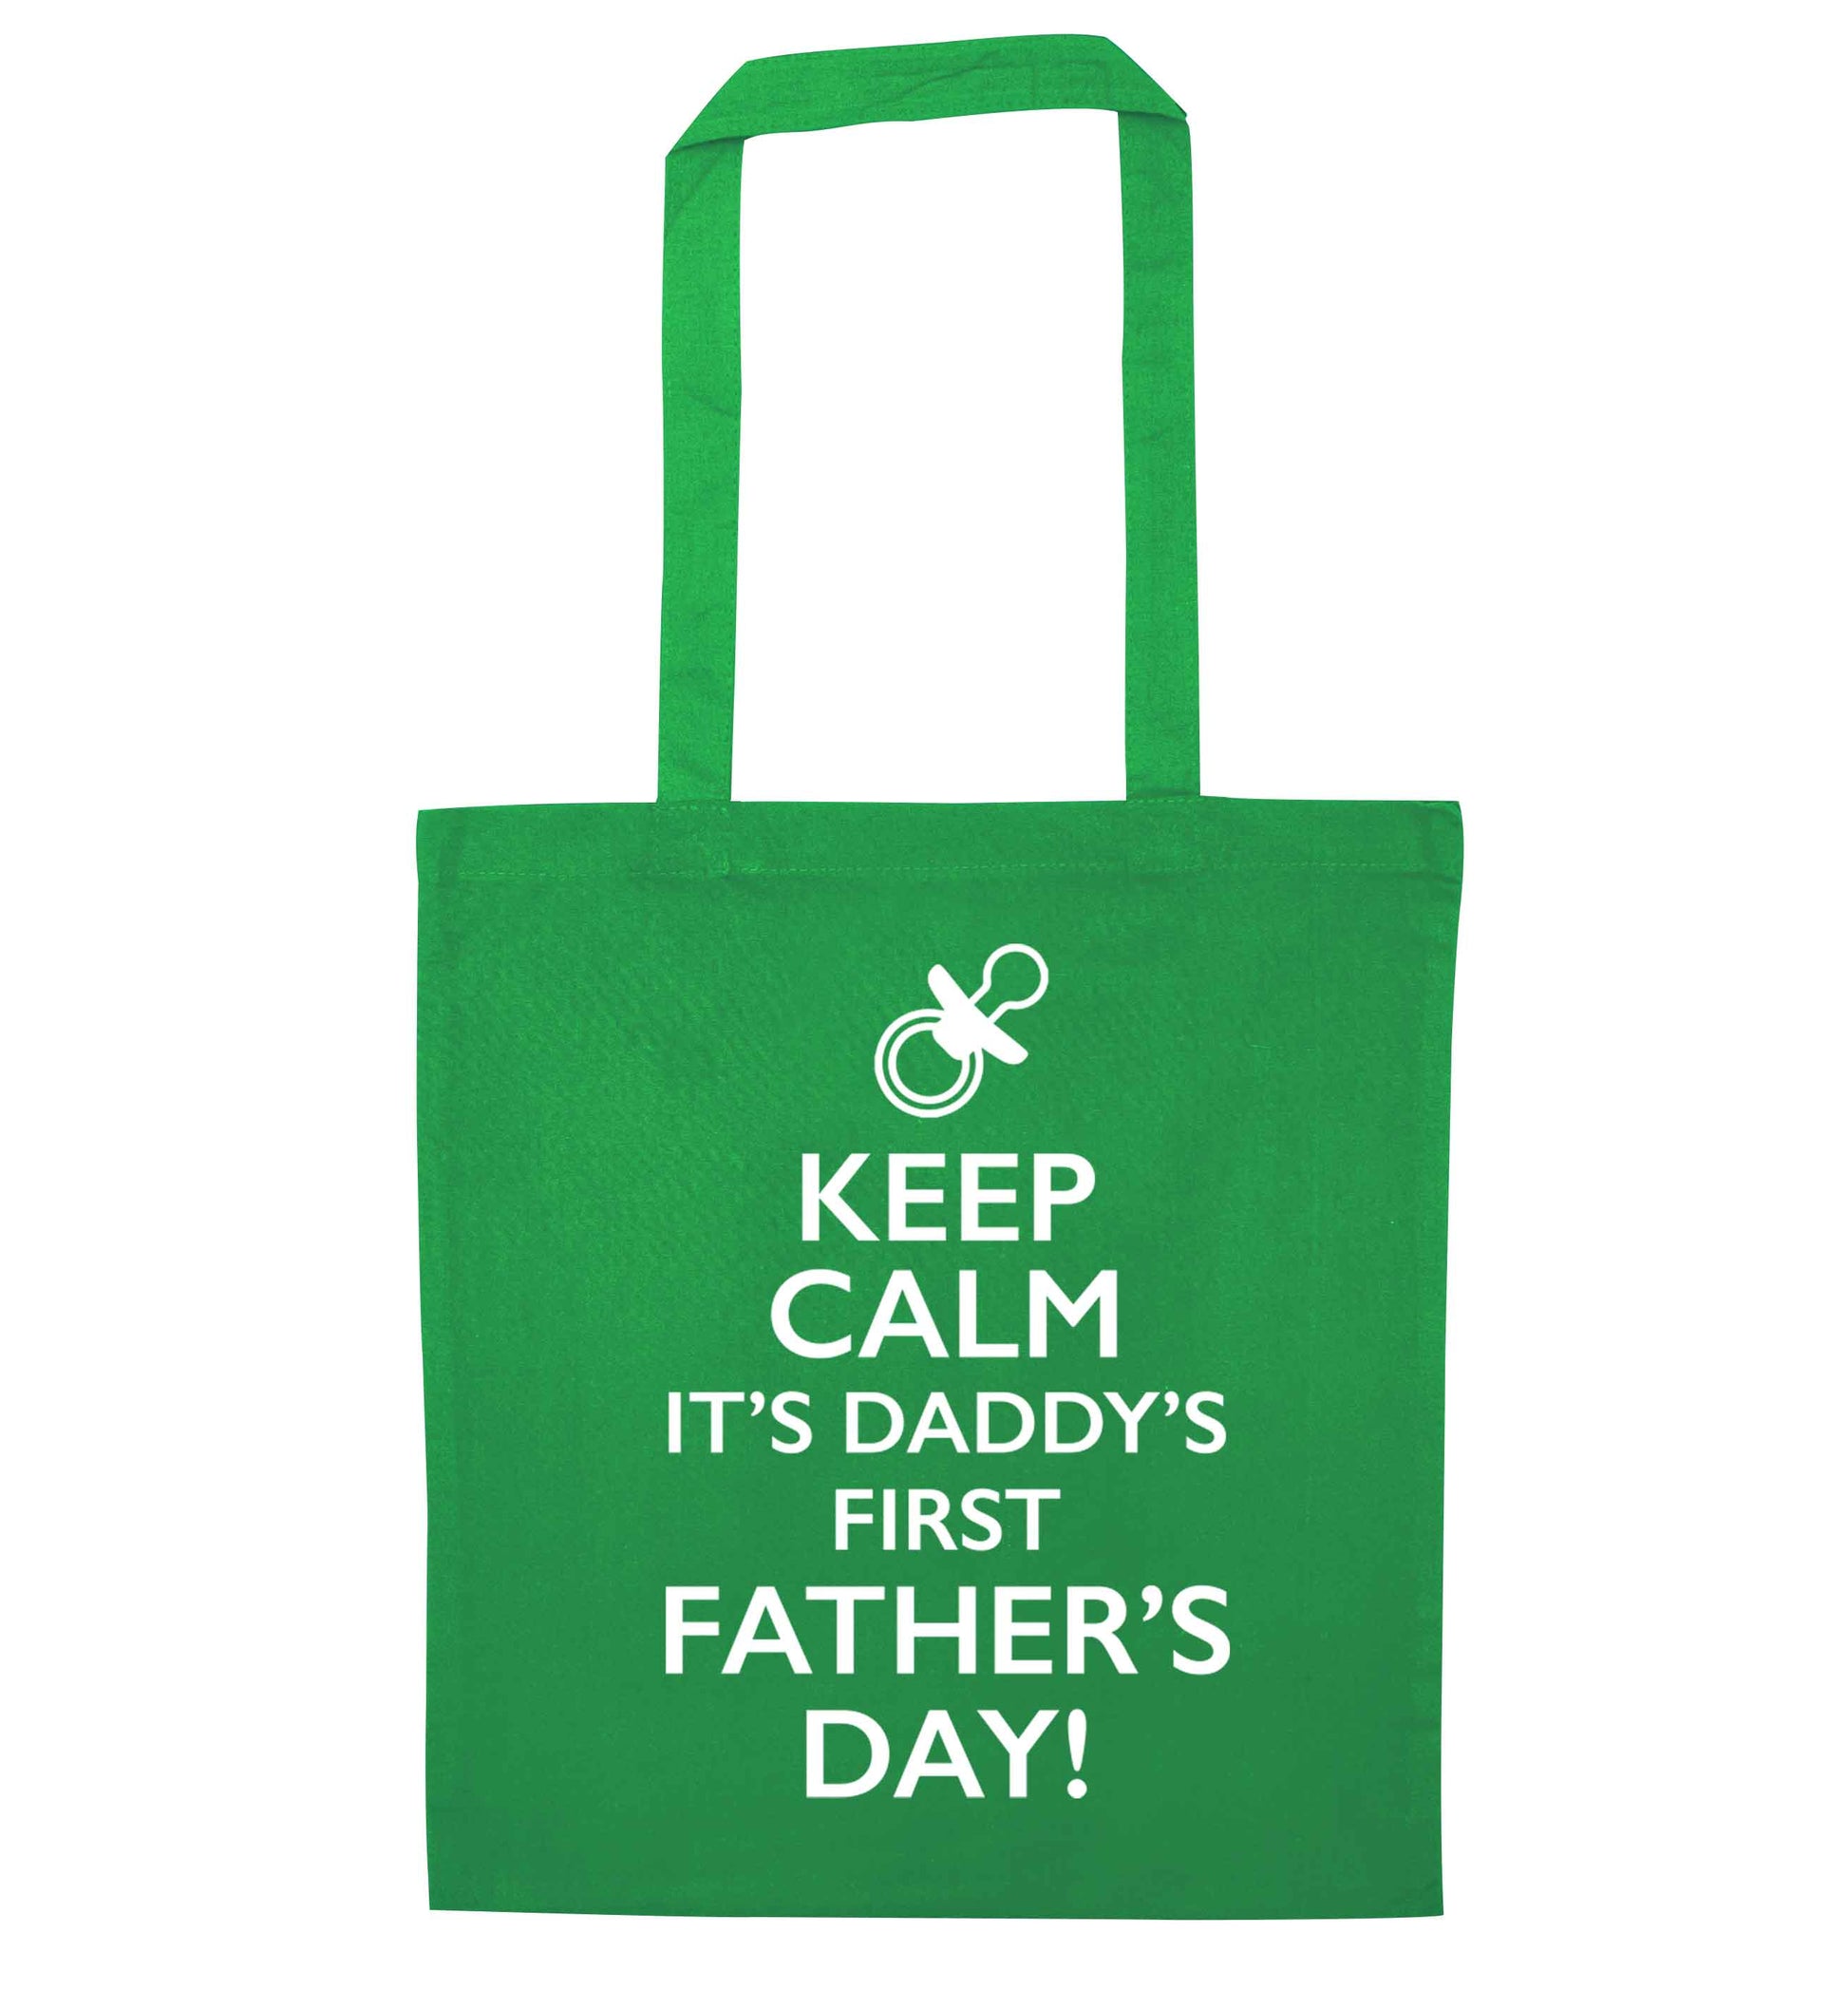 Keep calm it's daddys first father's day green tote bag